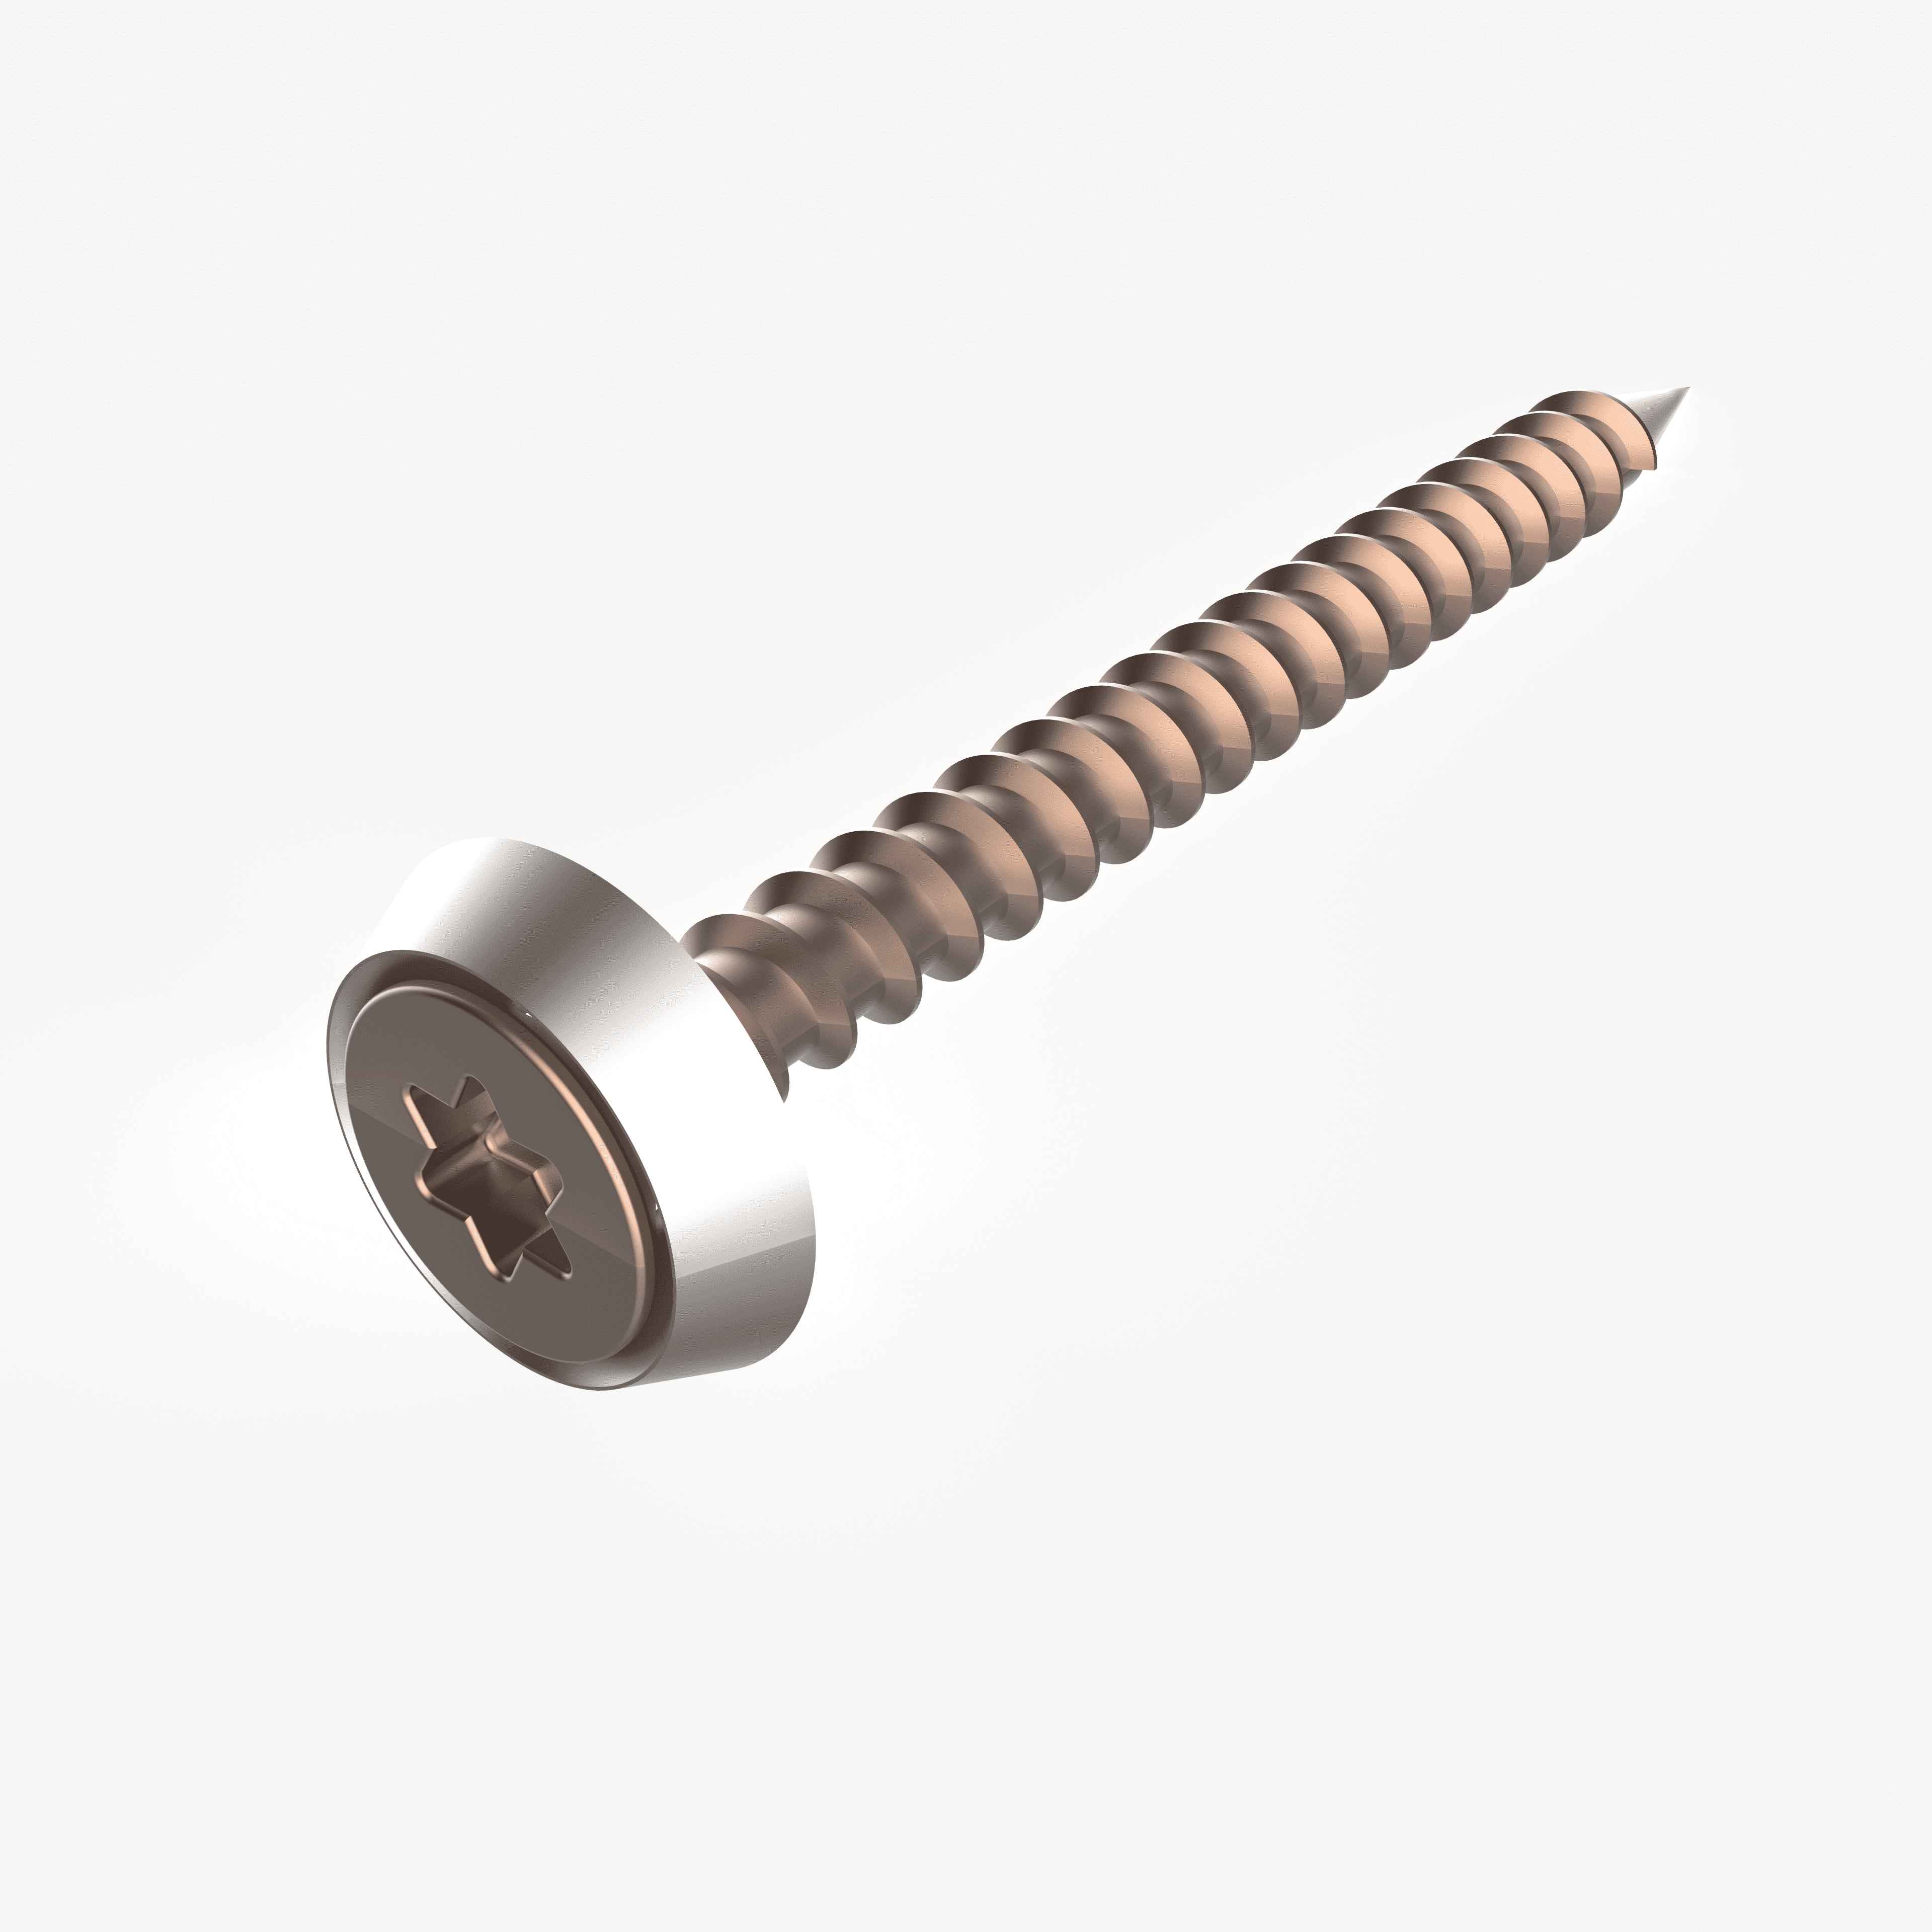 Wood screw and cone washer - x4 pack